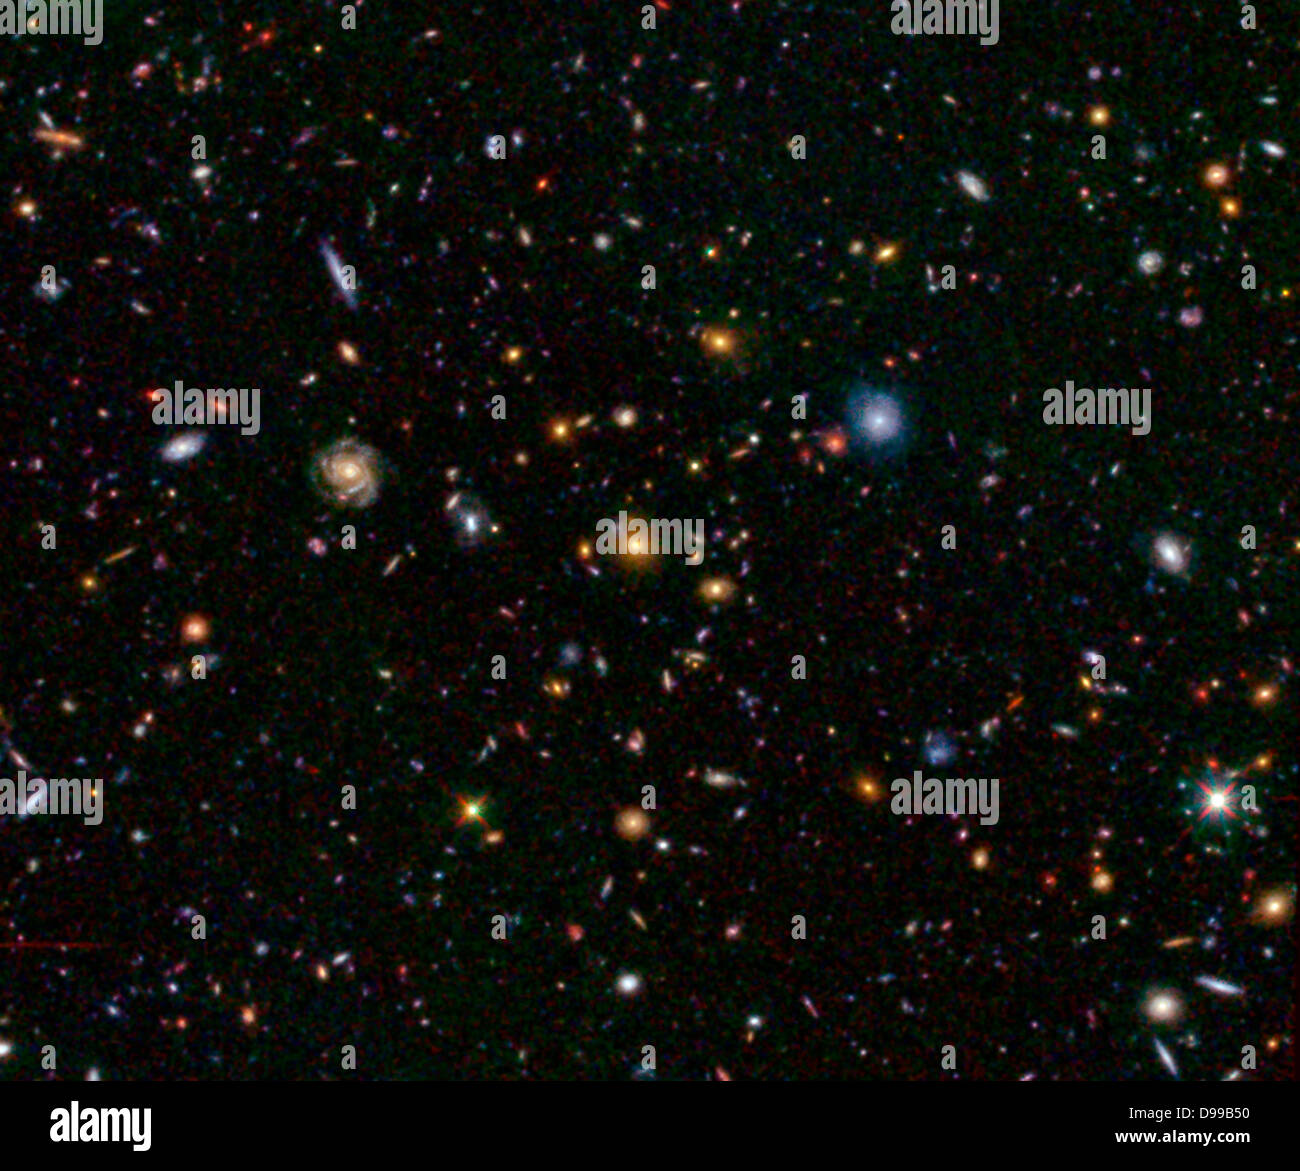 This image shows one of the most distant galaxies known, called GN-108036, dating back to 750 million years after the Big Bang. Stock Photo